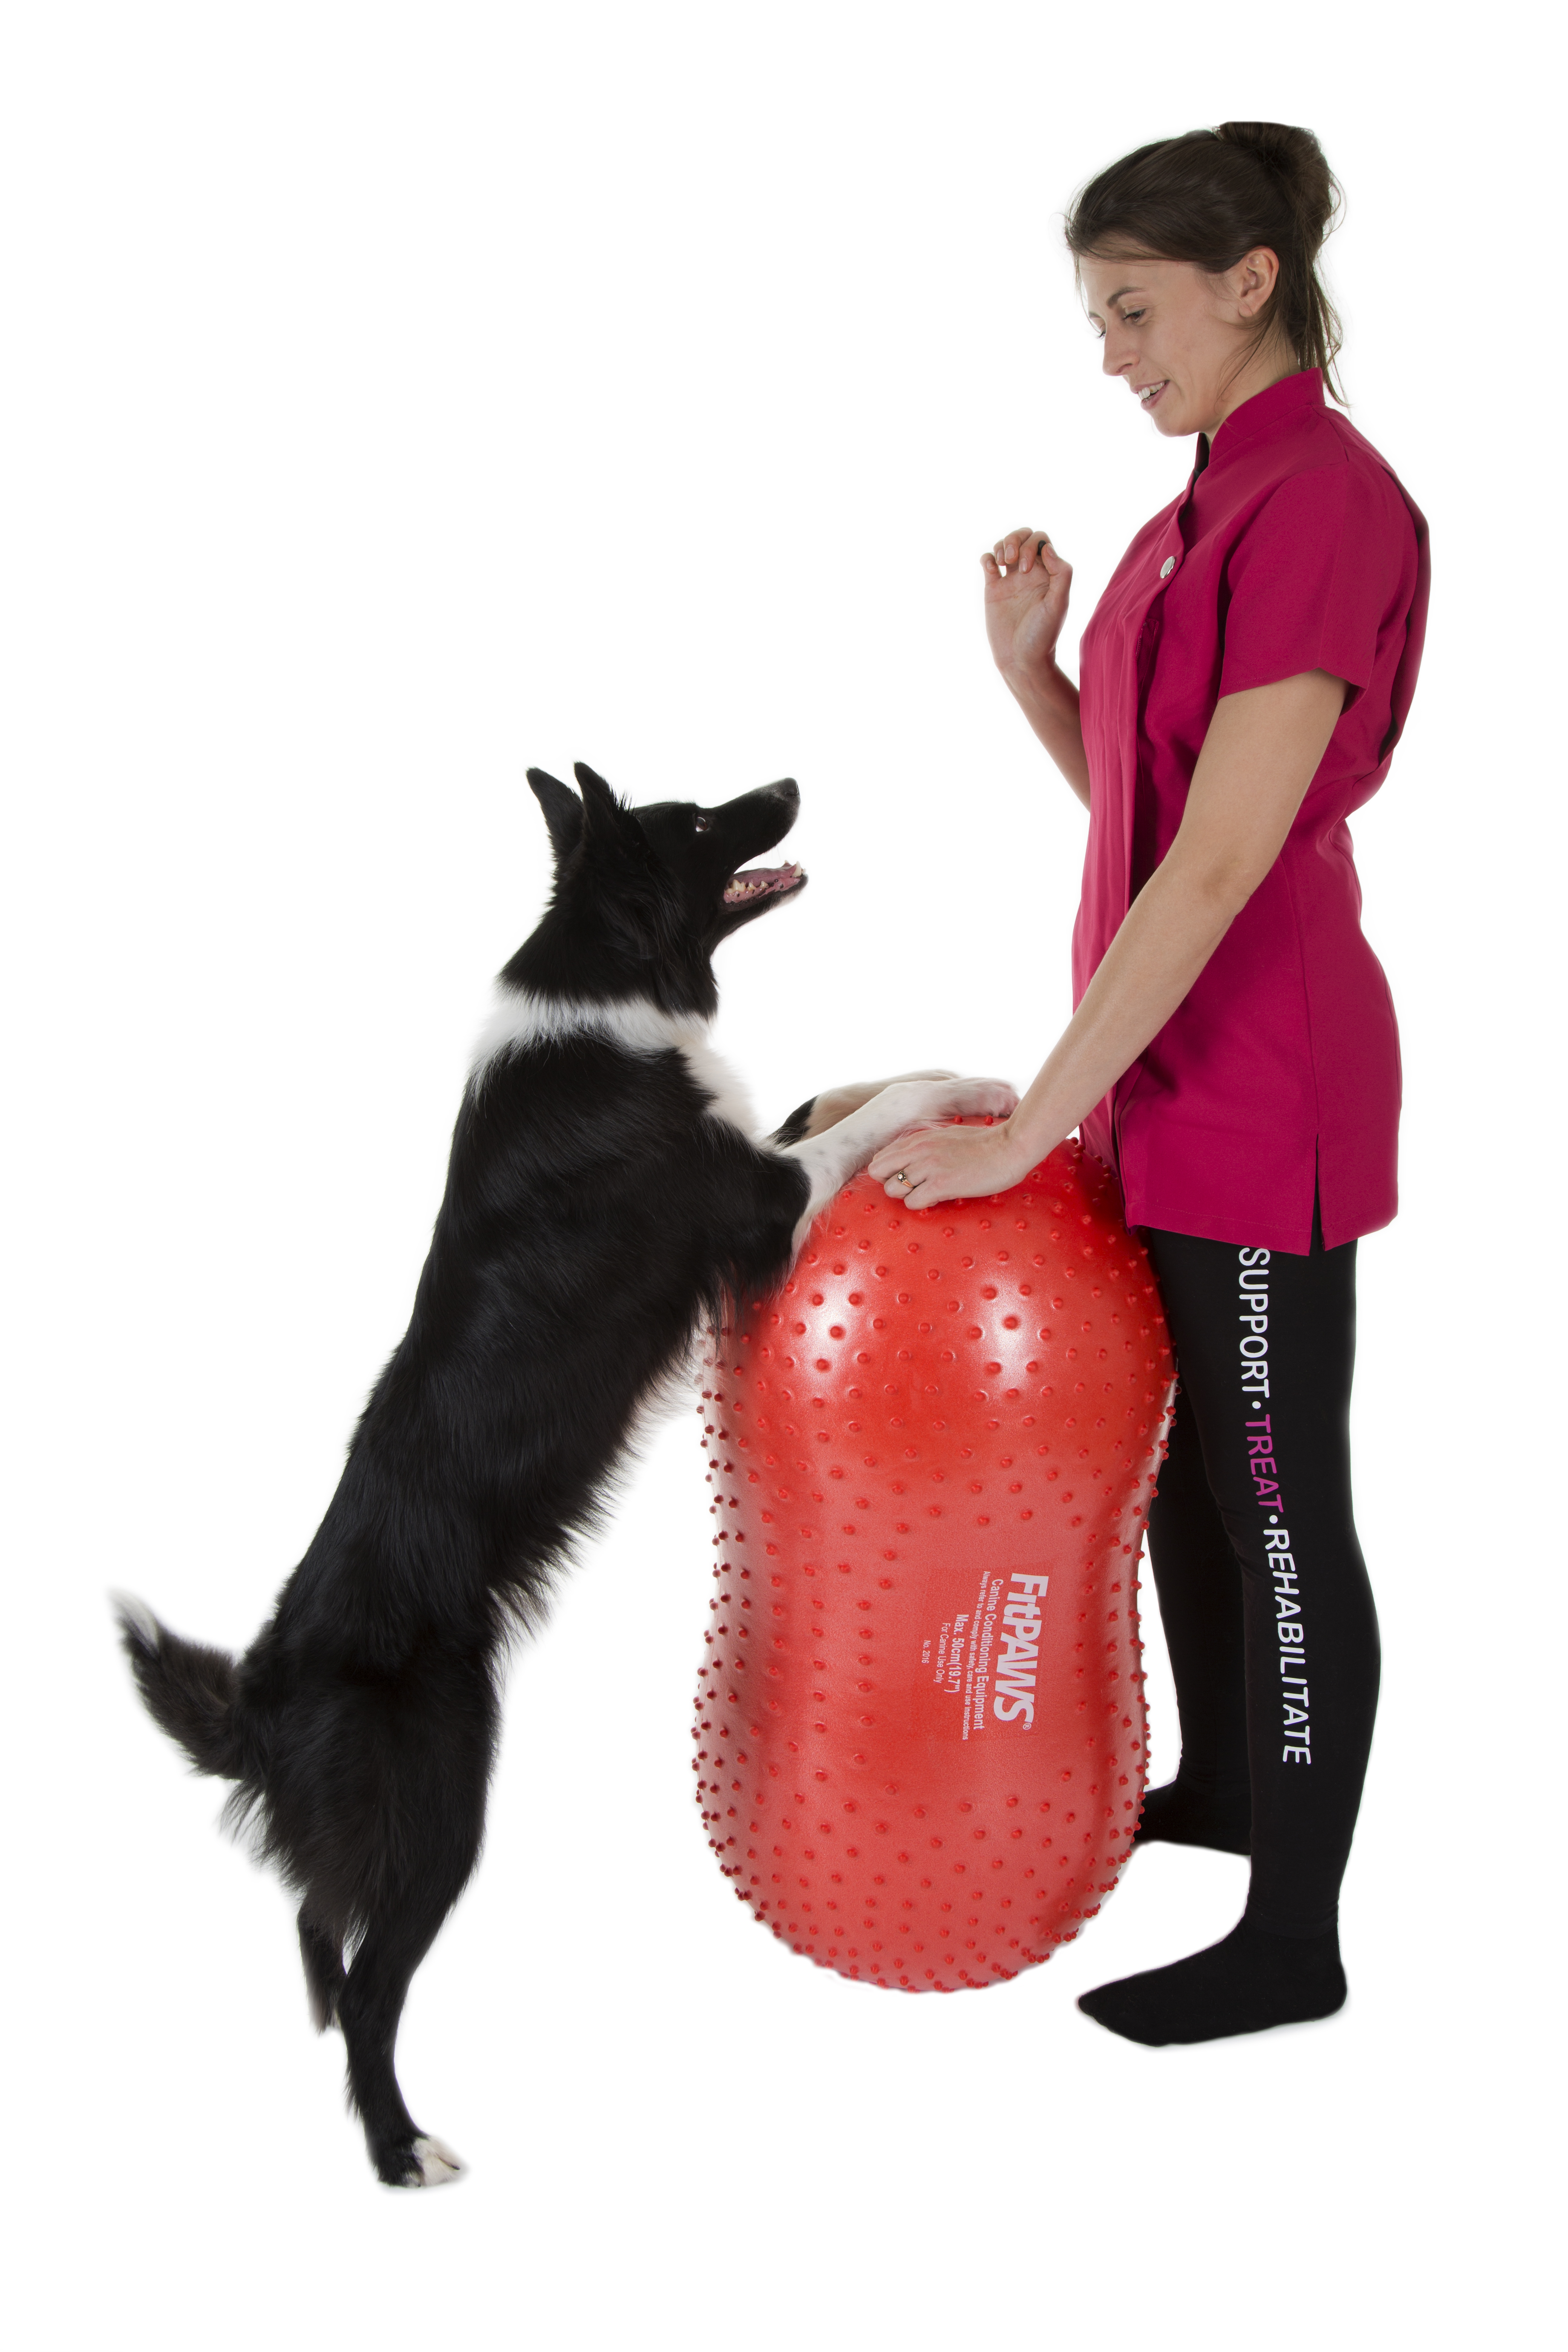 Border collie dog on FitPAWS peanut canine fitness equipment